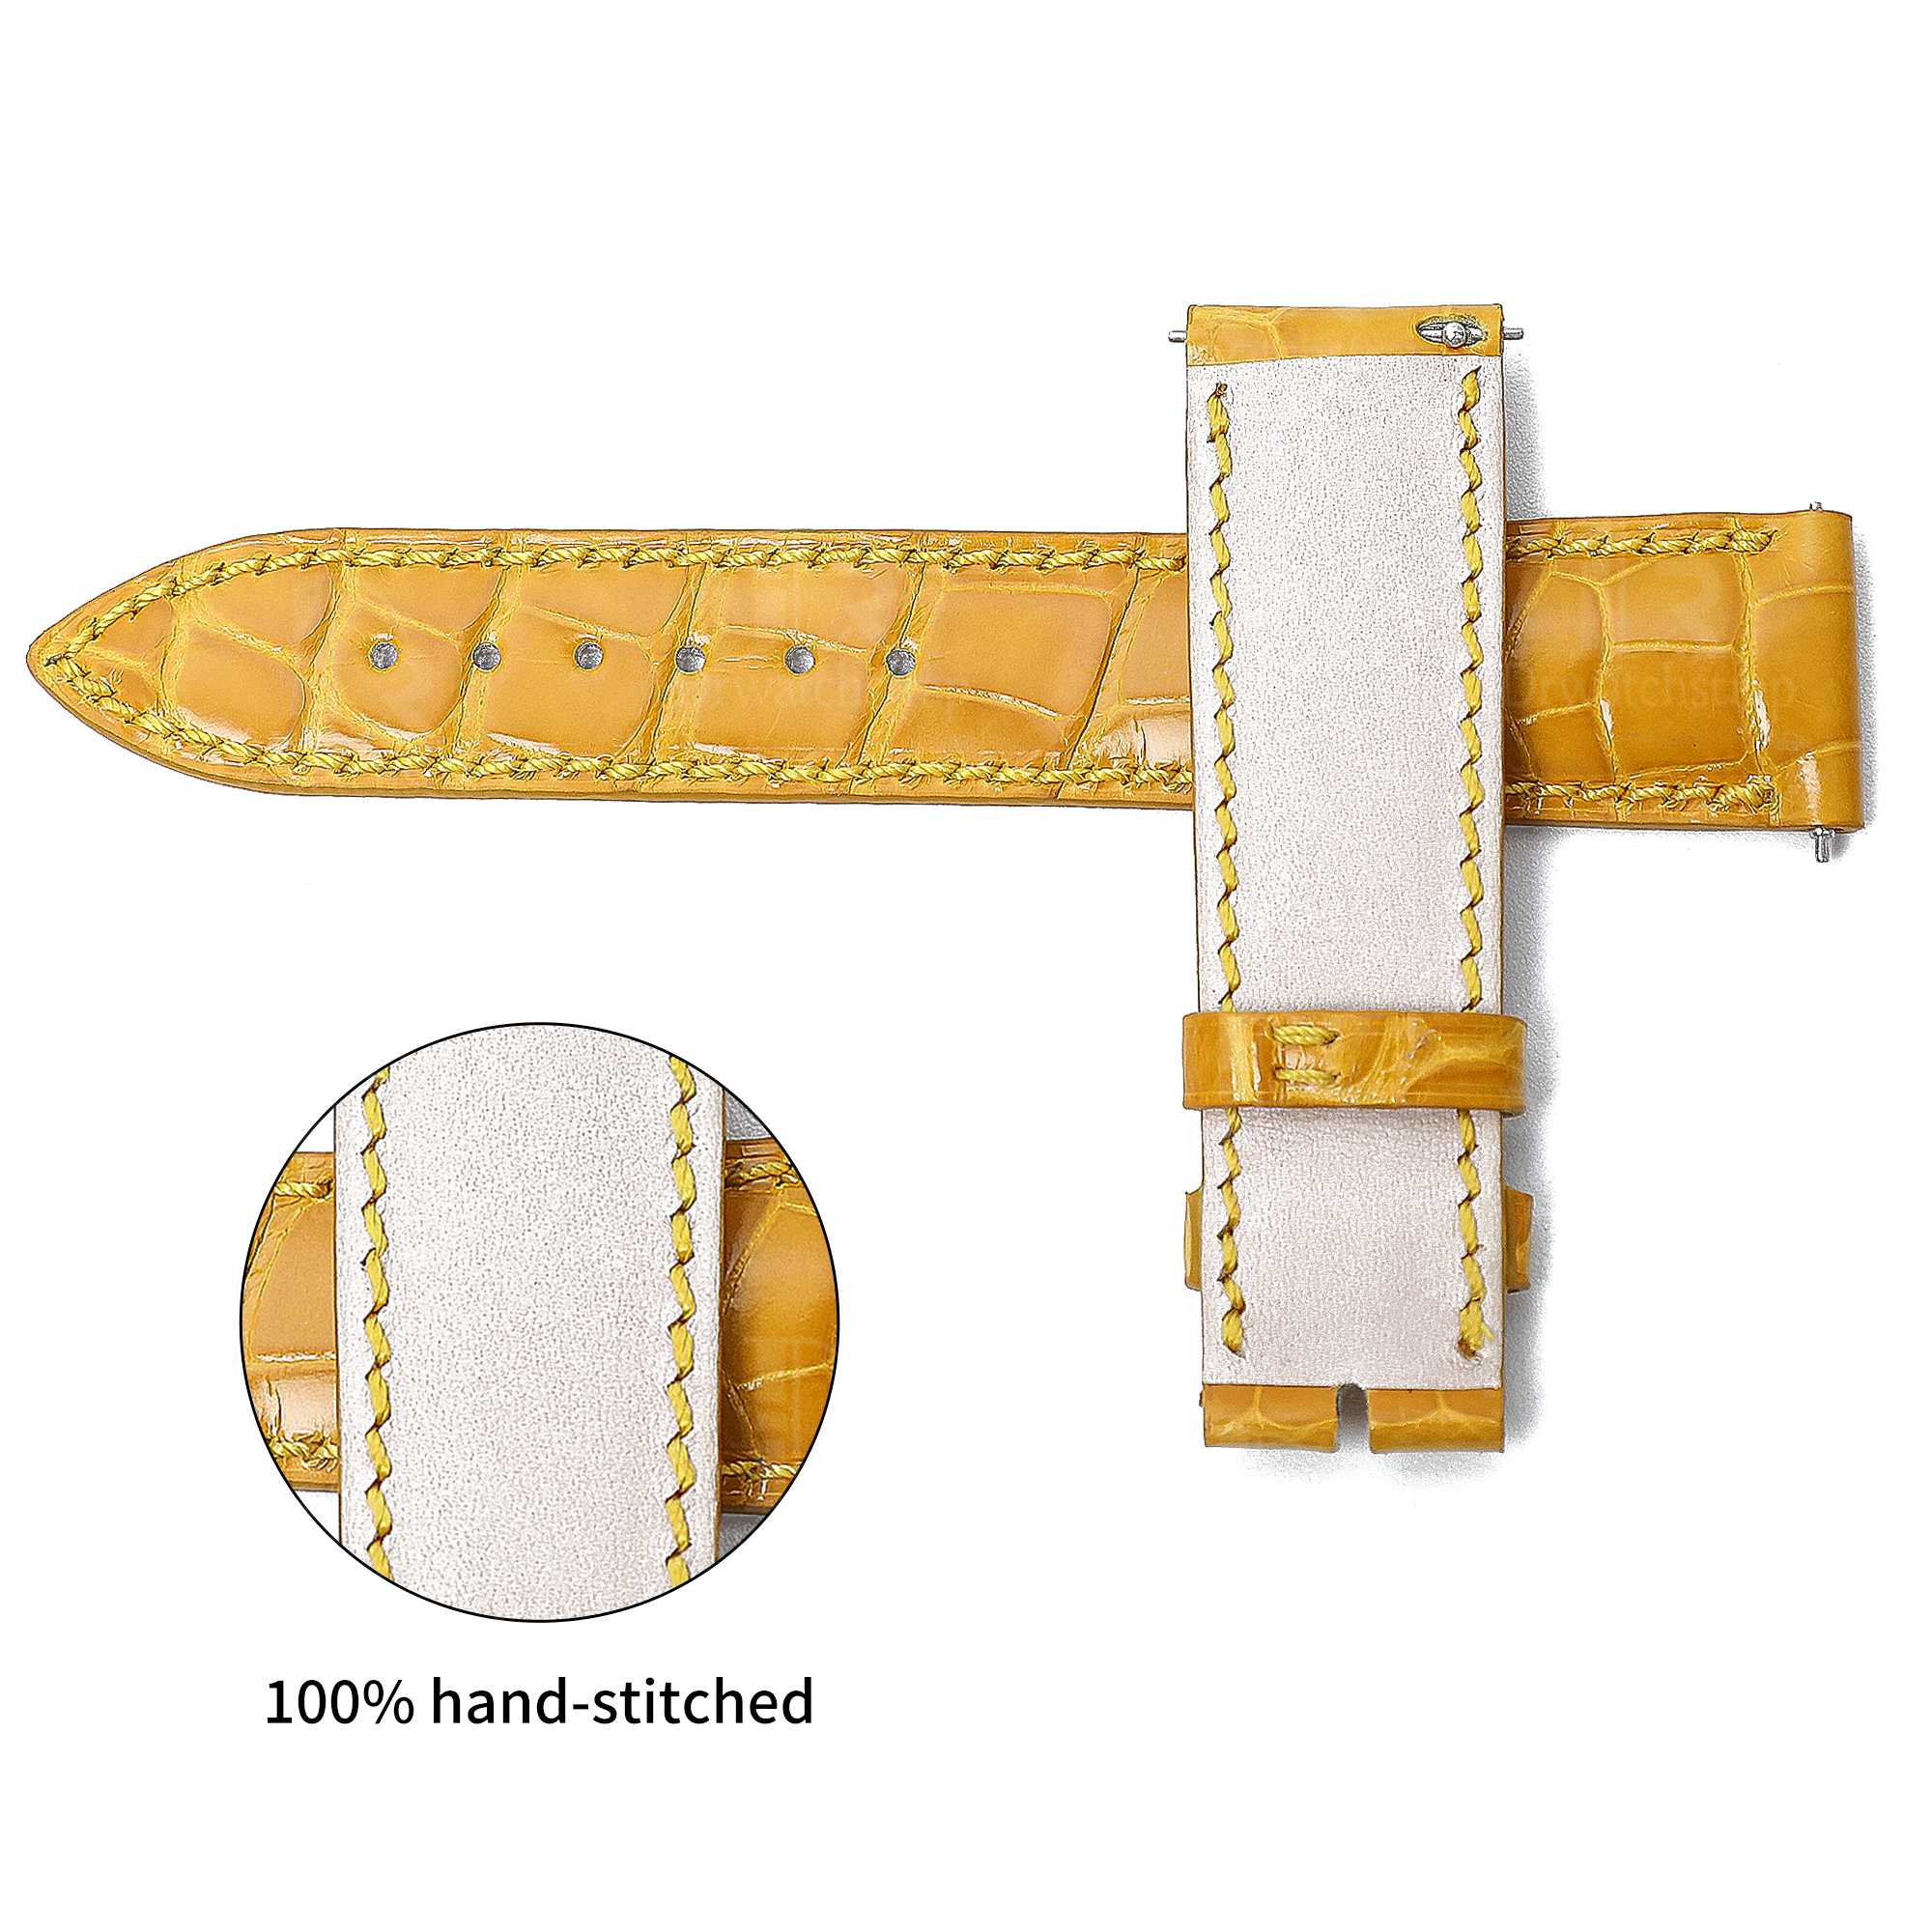 Handmade replacement Yellow Leather watch strap for Franck Muller Crazy Hour diamond watch